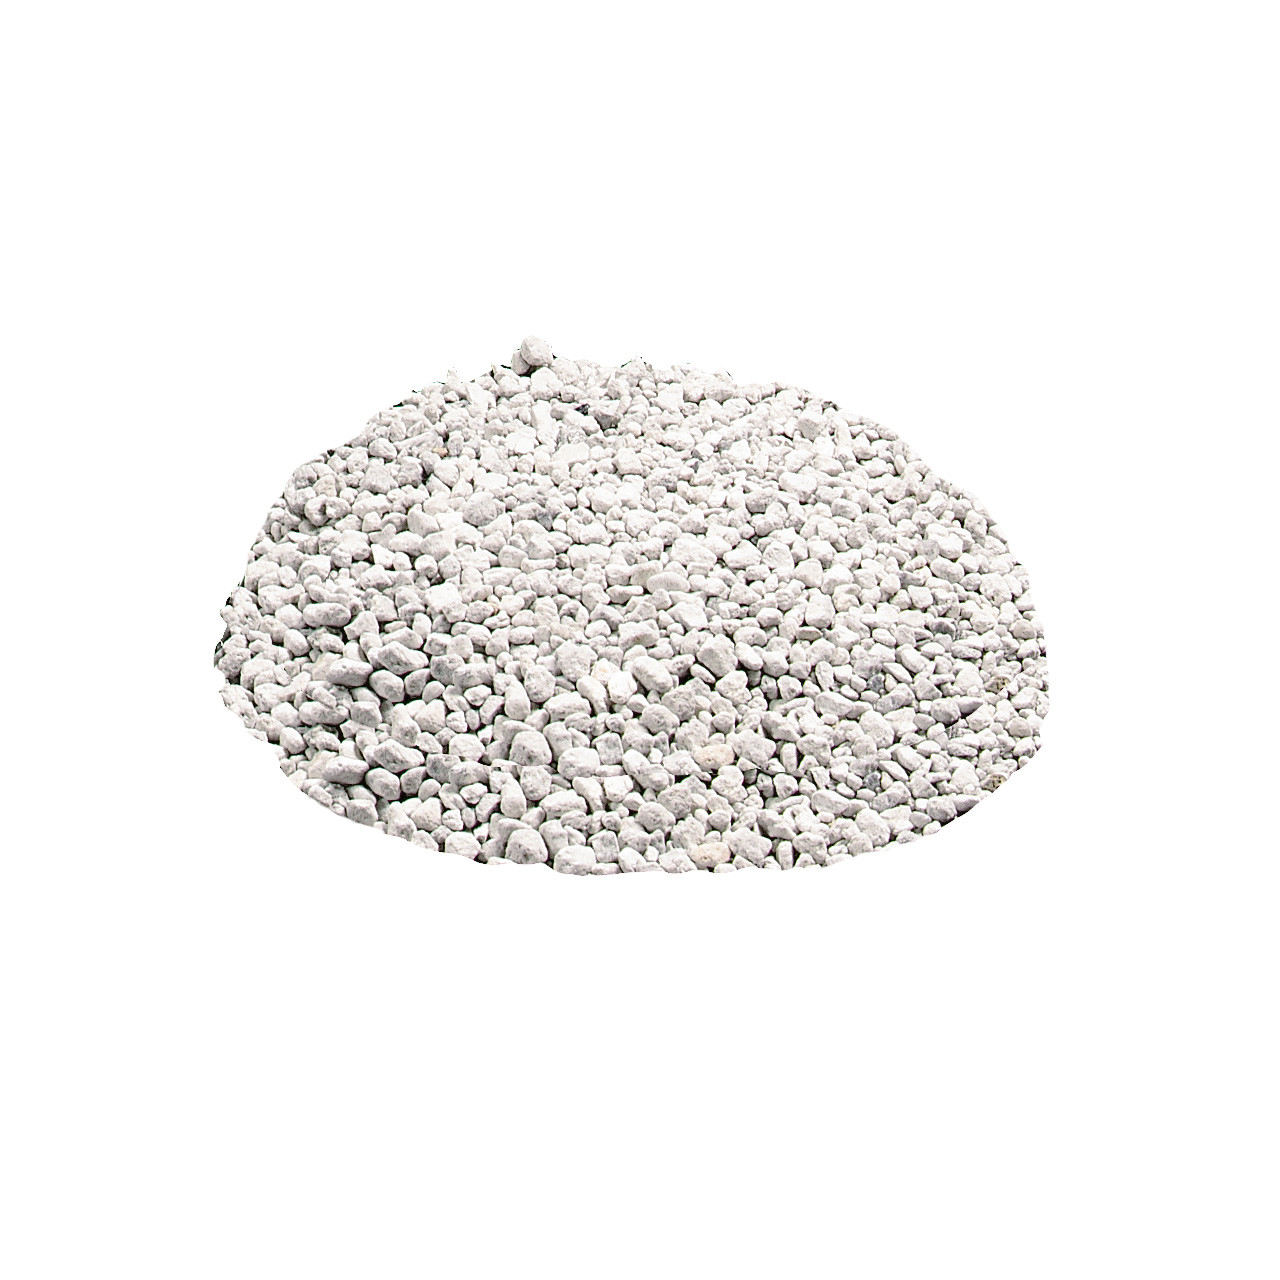 Pumice Refill for Annealing Pans